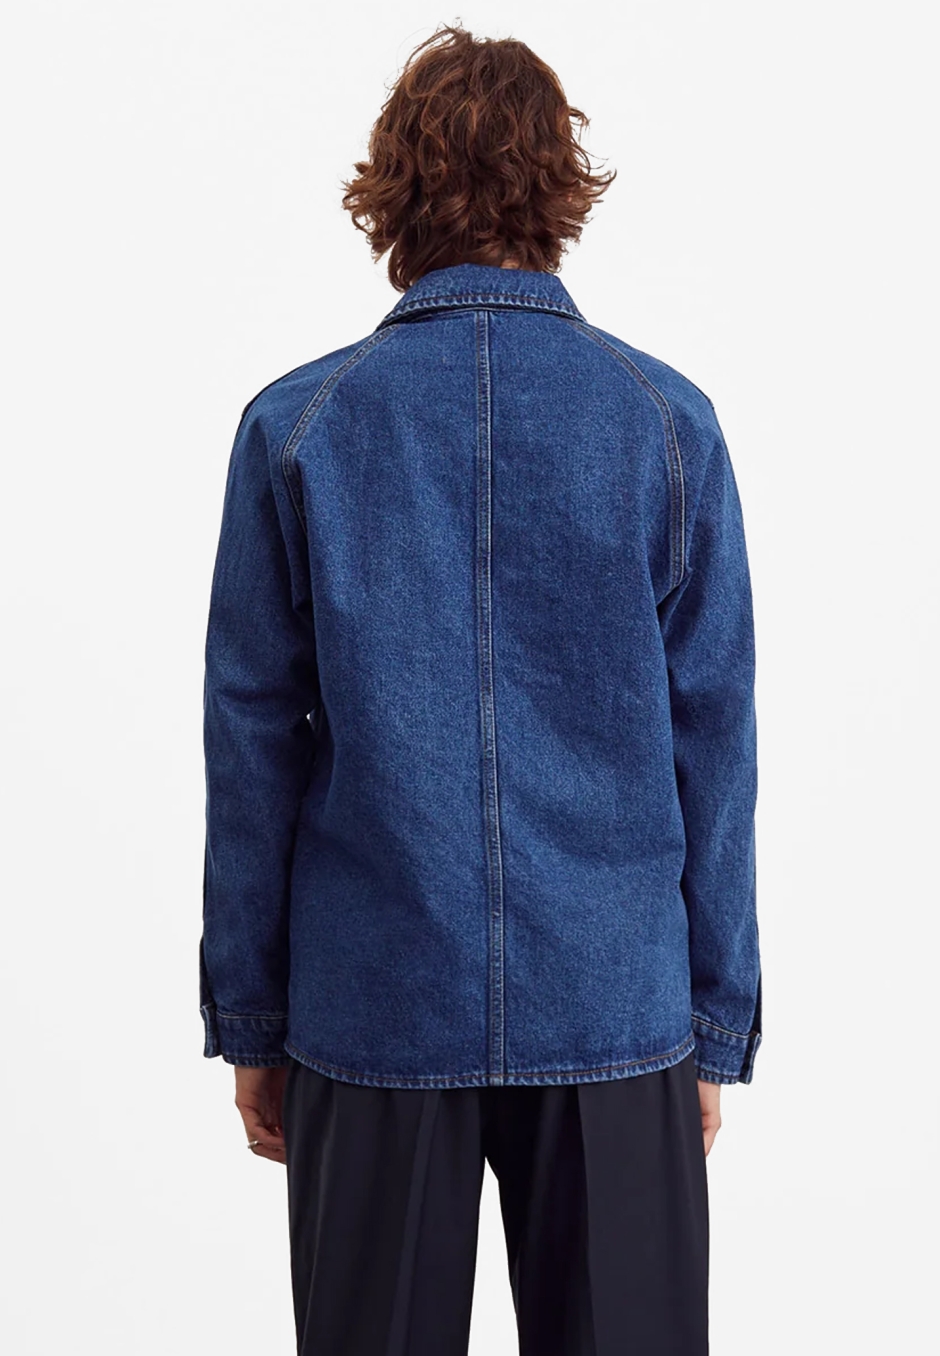 Another Aspect Another Denim Jacket 1.0